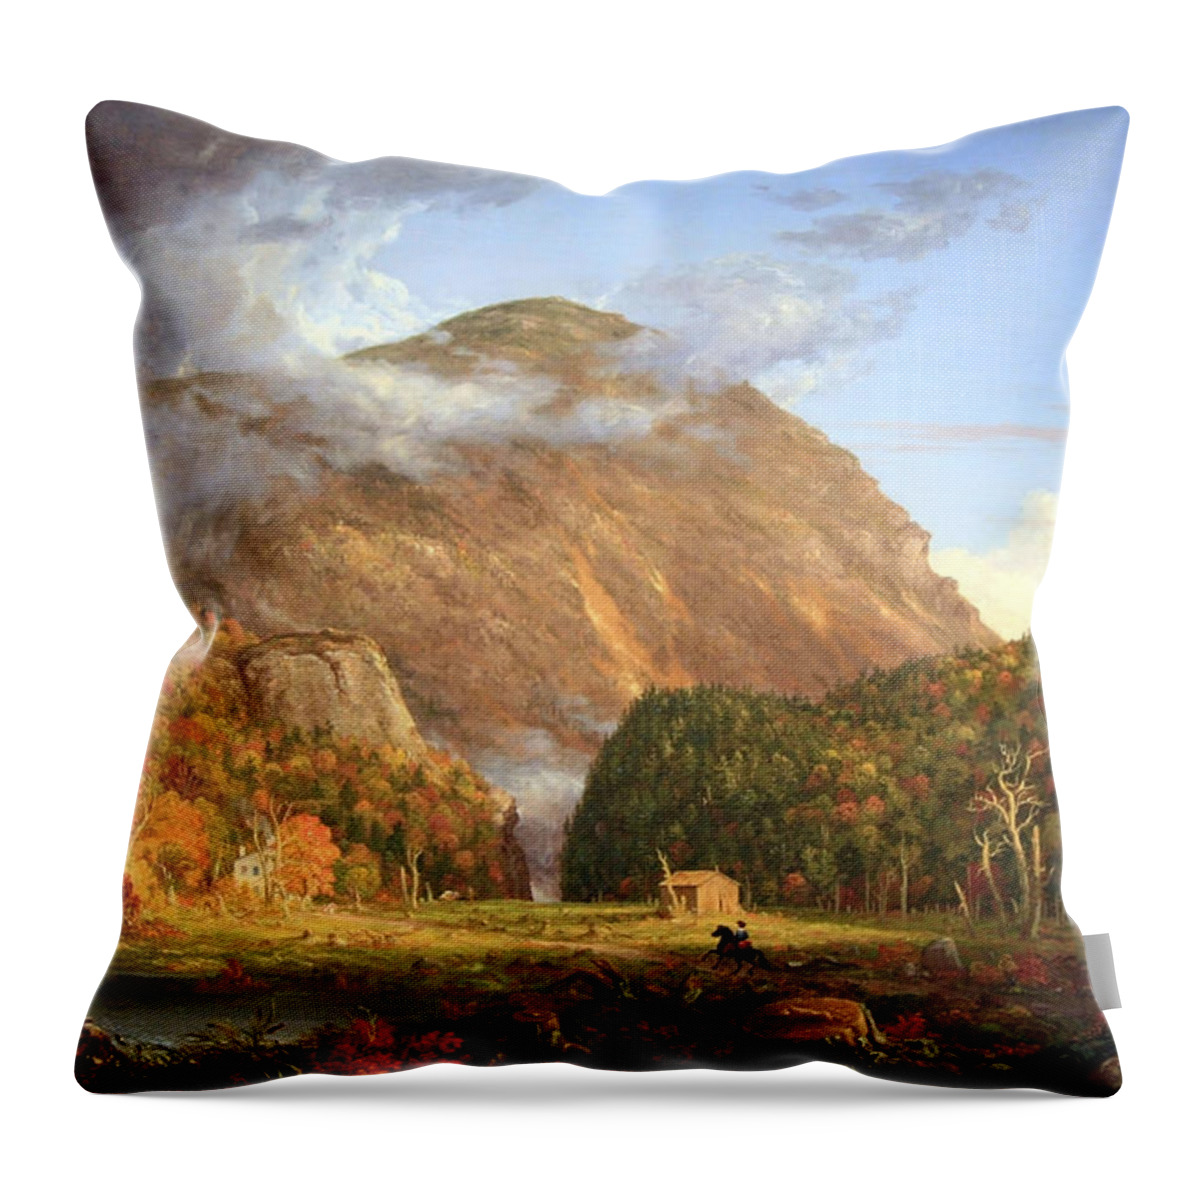 The Notch Of The White Mountains Throw Pillow featuring the photograph Cole's The Notch Of The White Mountains -- Crawford Notch by Cora Wandel